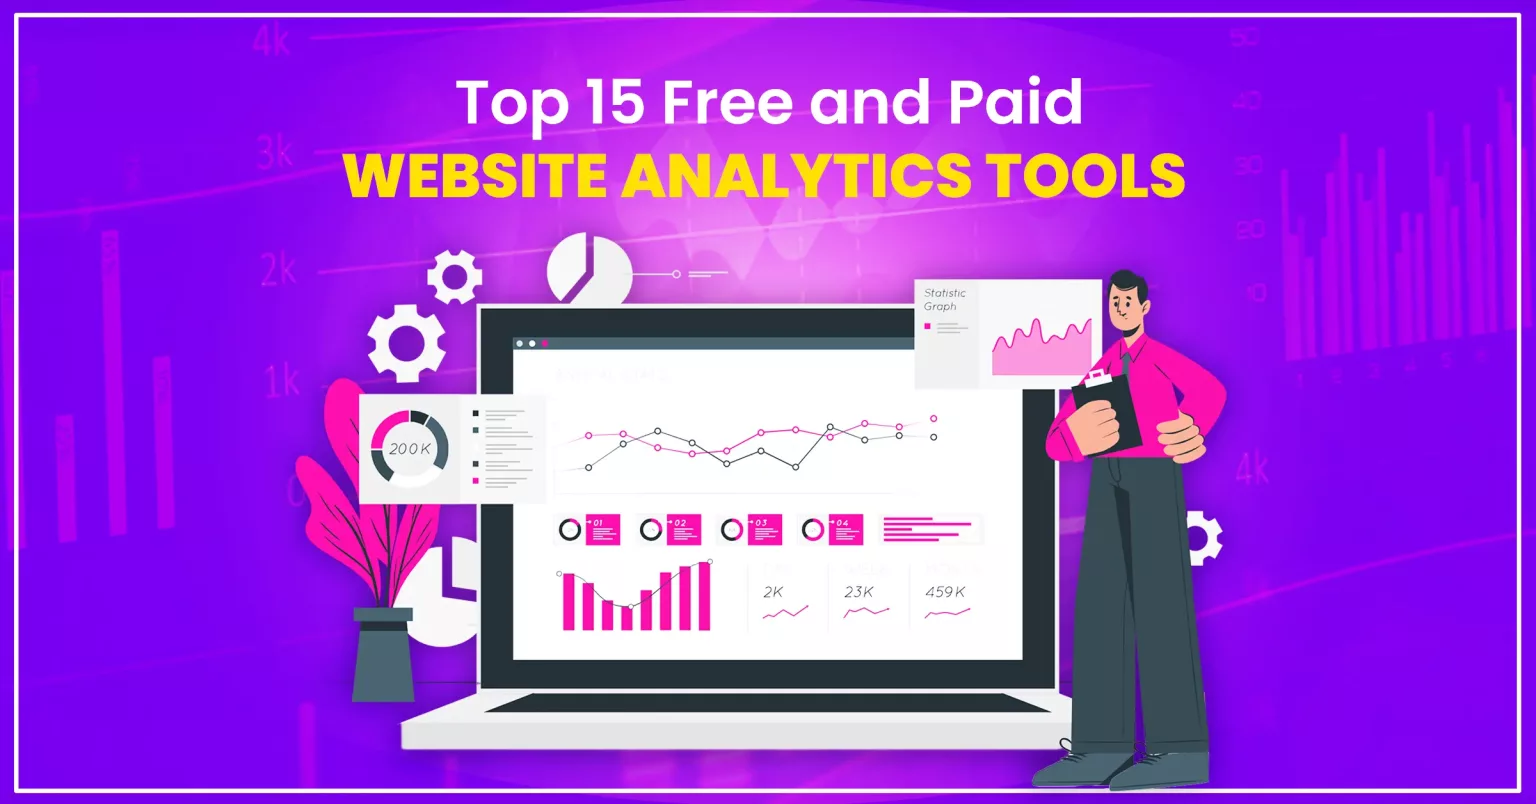 Top 15 free and paid website analytics tools Blog cove image